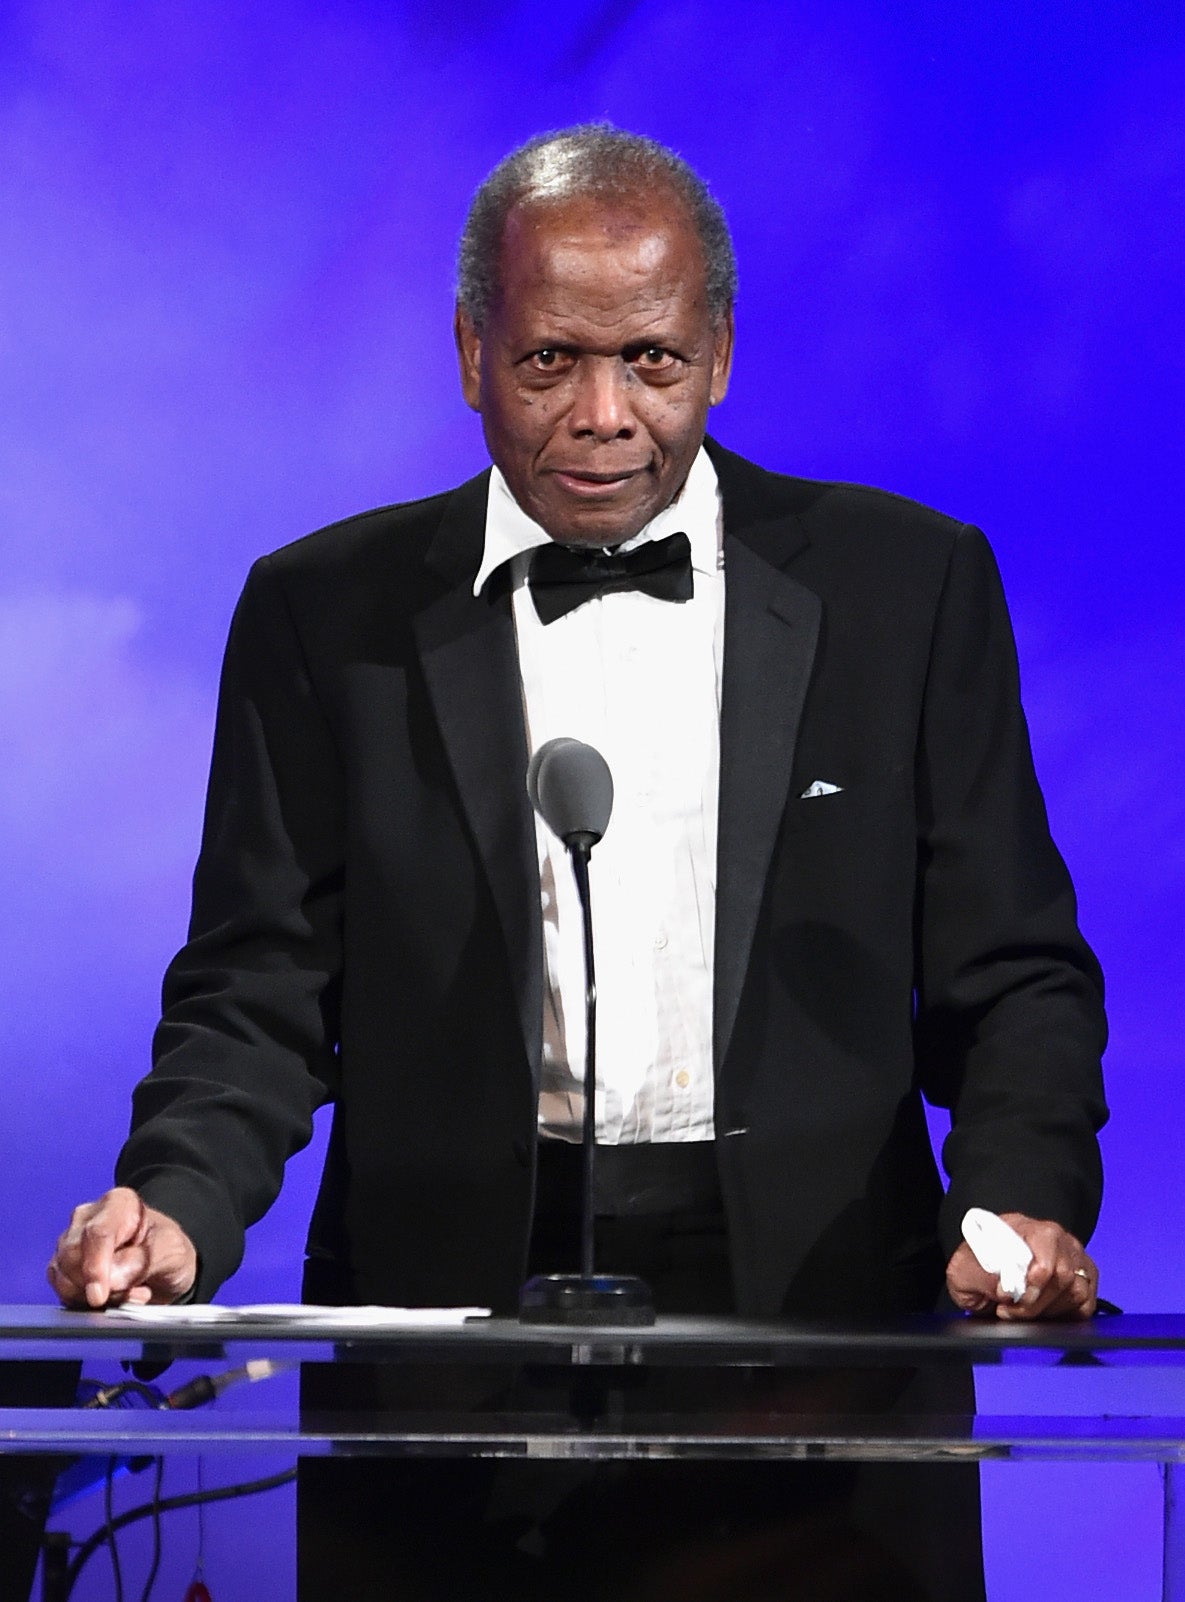 Sidney Poitier Turns 90: Inside the Actor, Activist and Diplomat's Incredible Life
